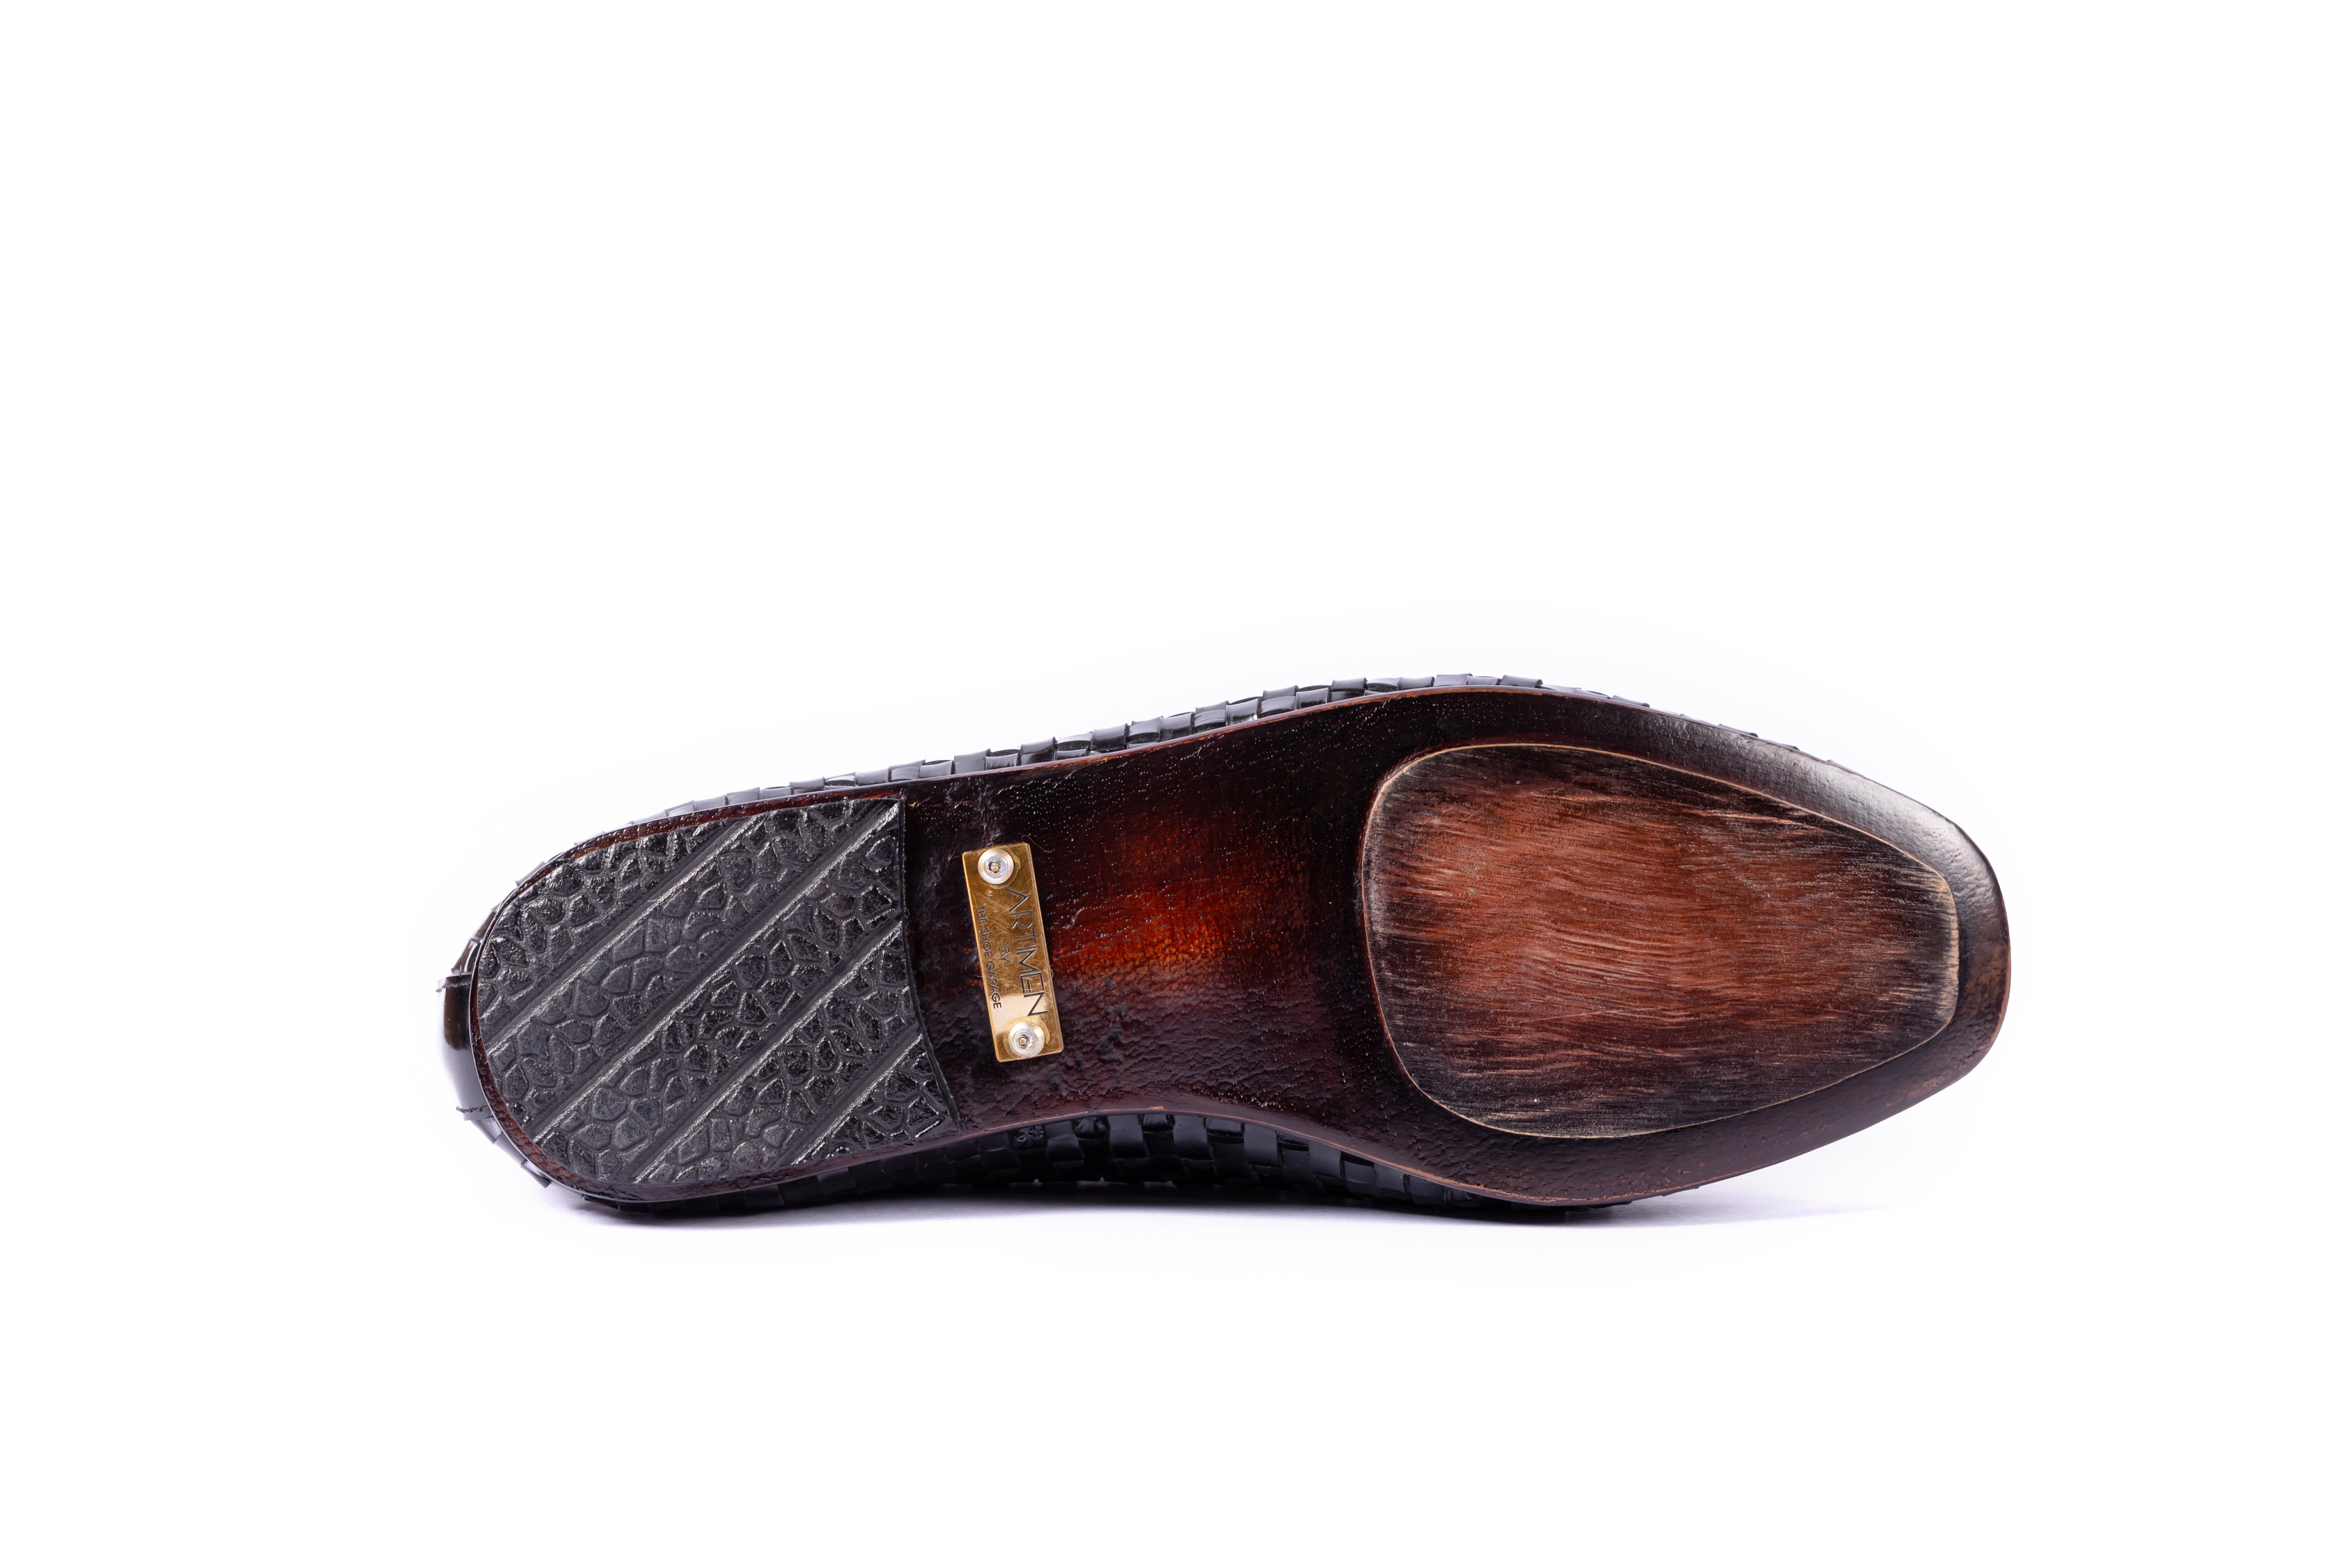 Prox Loafer